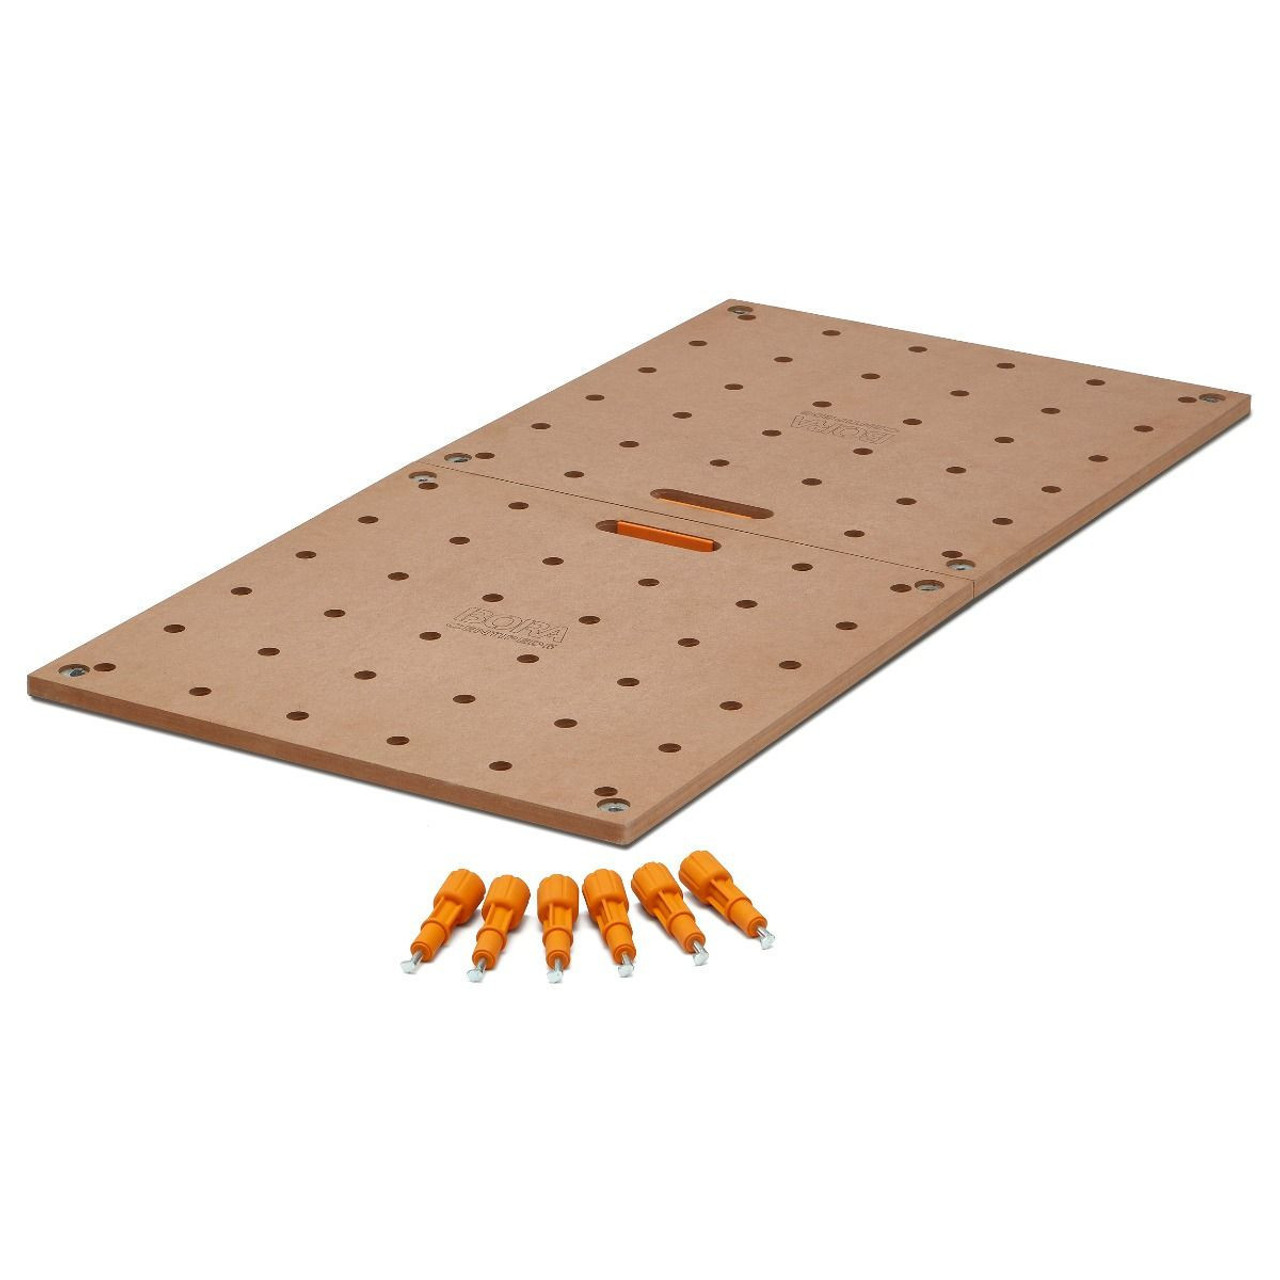 Centipede Table Top (3/4-inch Dog Holes)